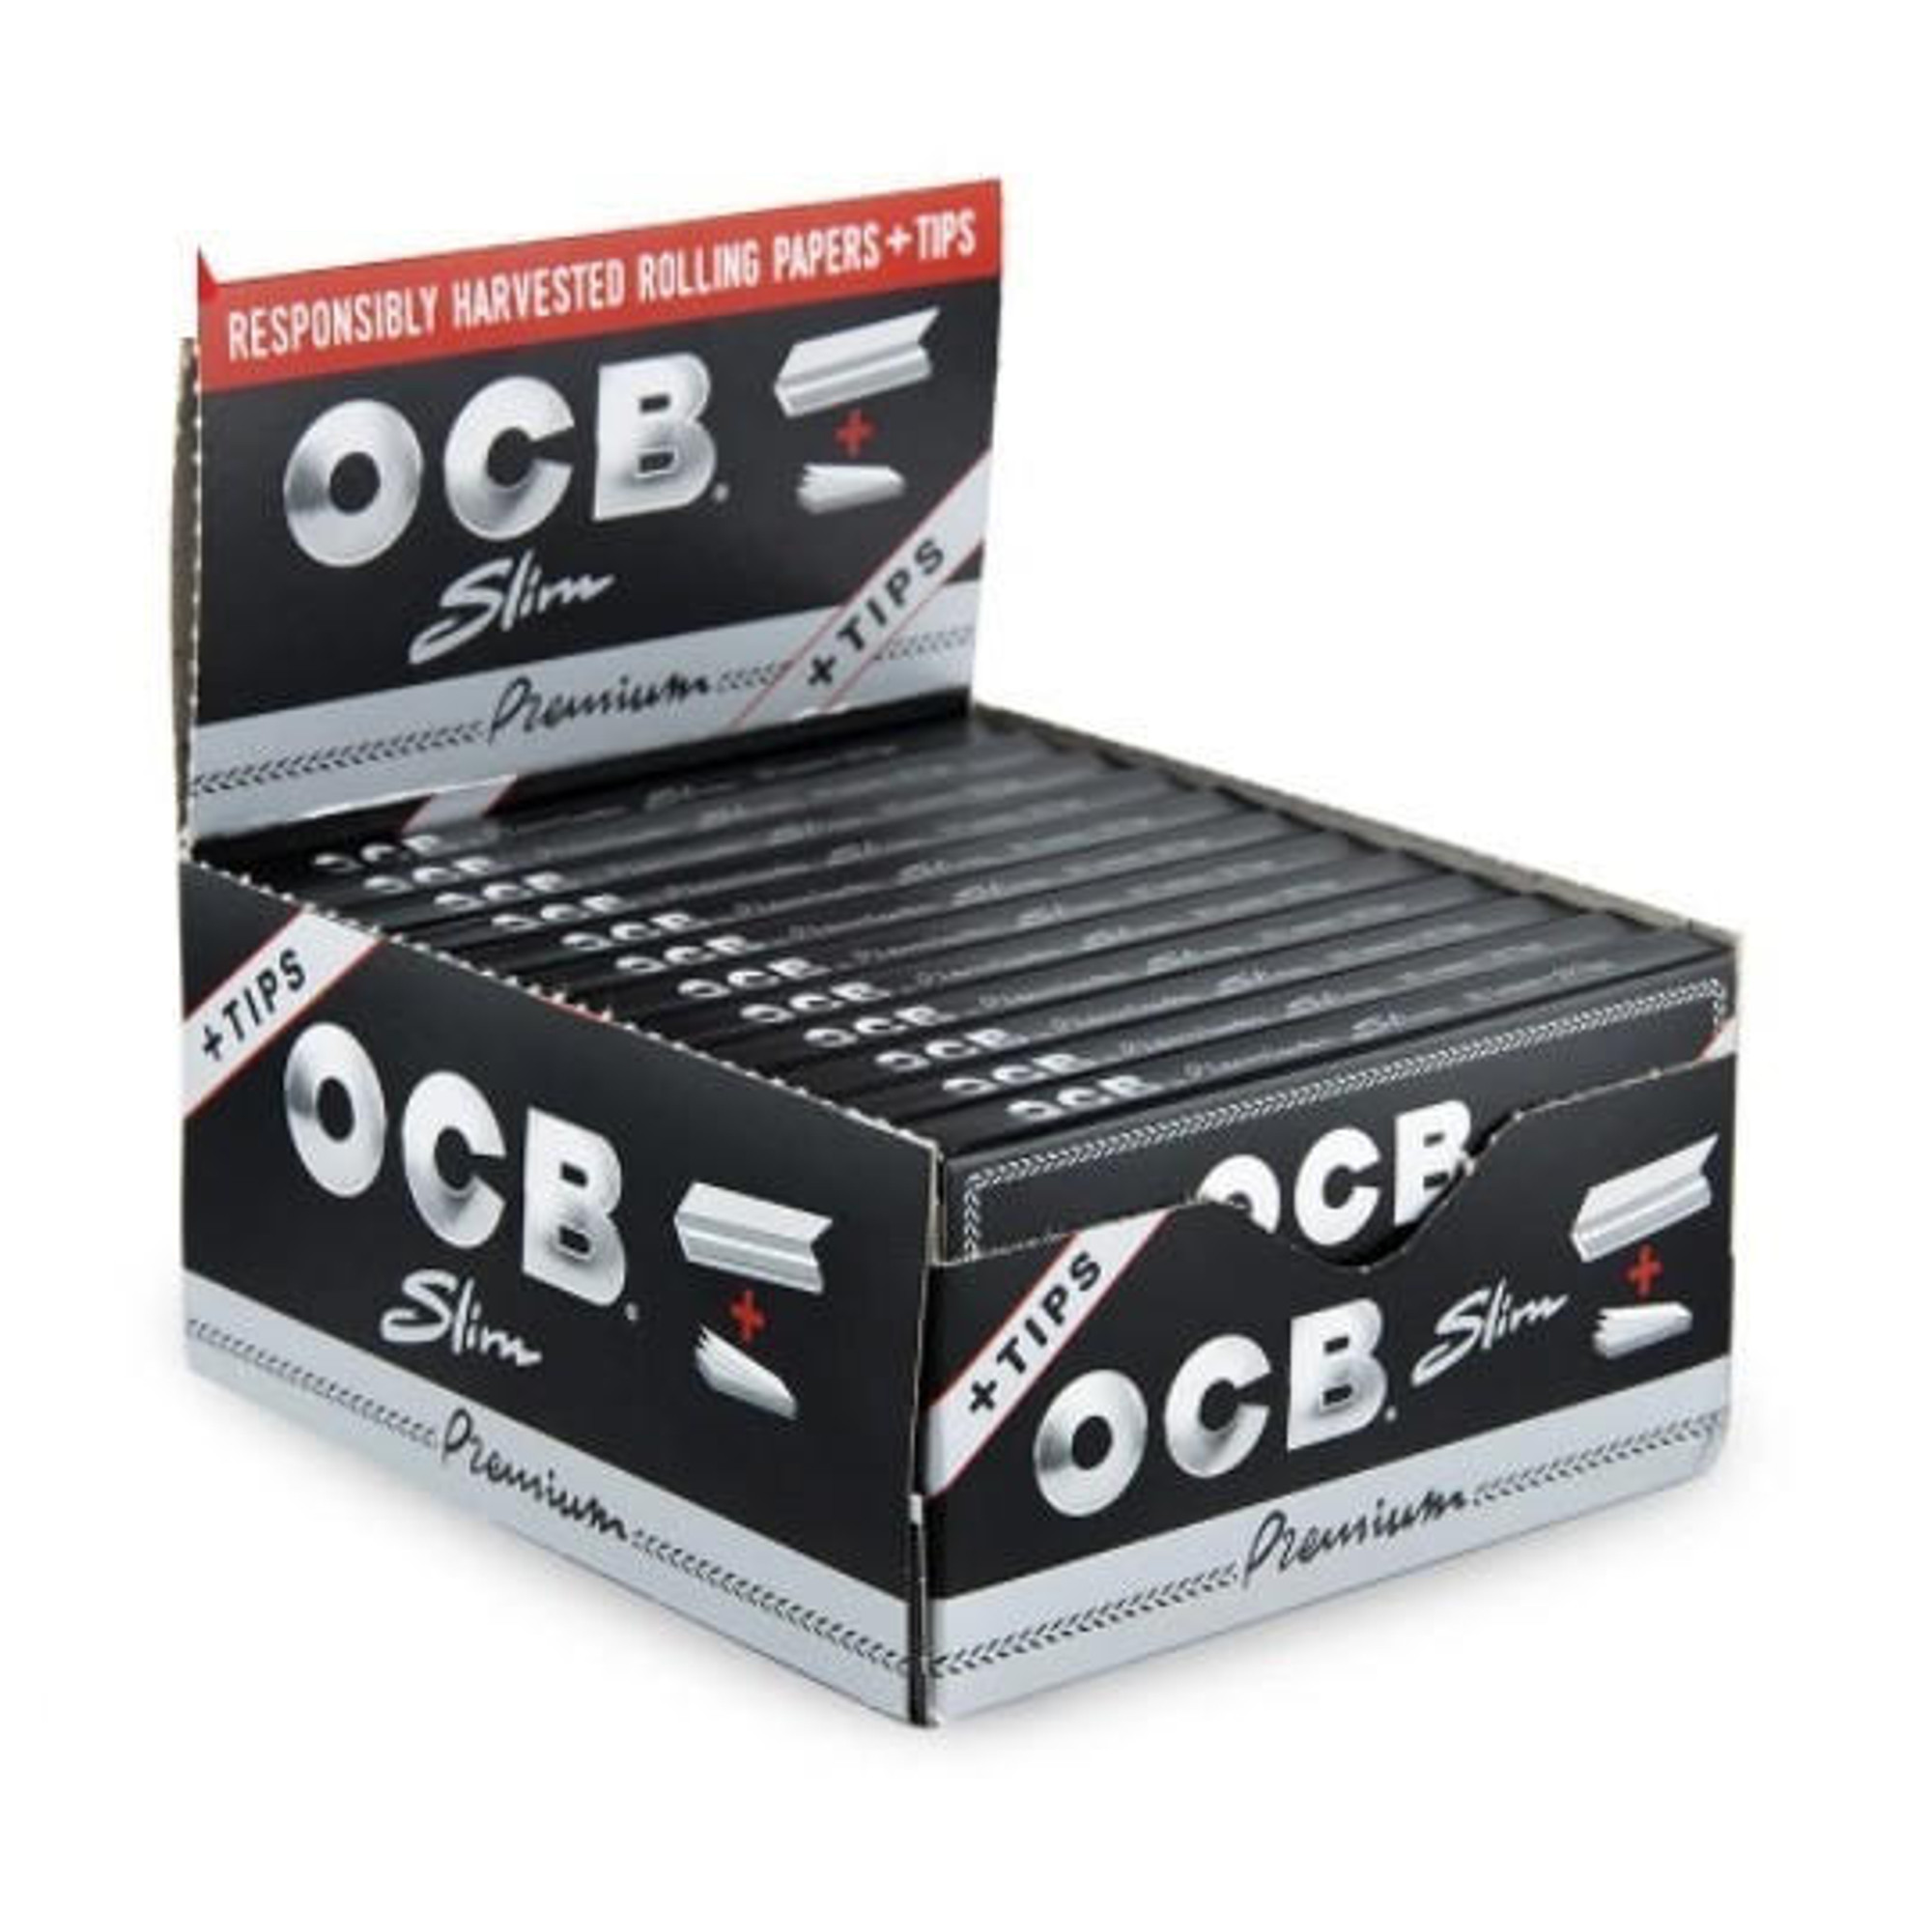 OCB BROWN RICE 1 1/4 ROLLING PAPERS + TIPS - 24CT DISPLAY